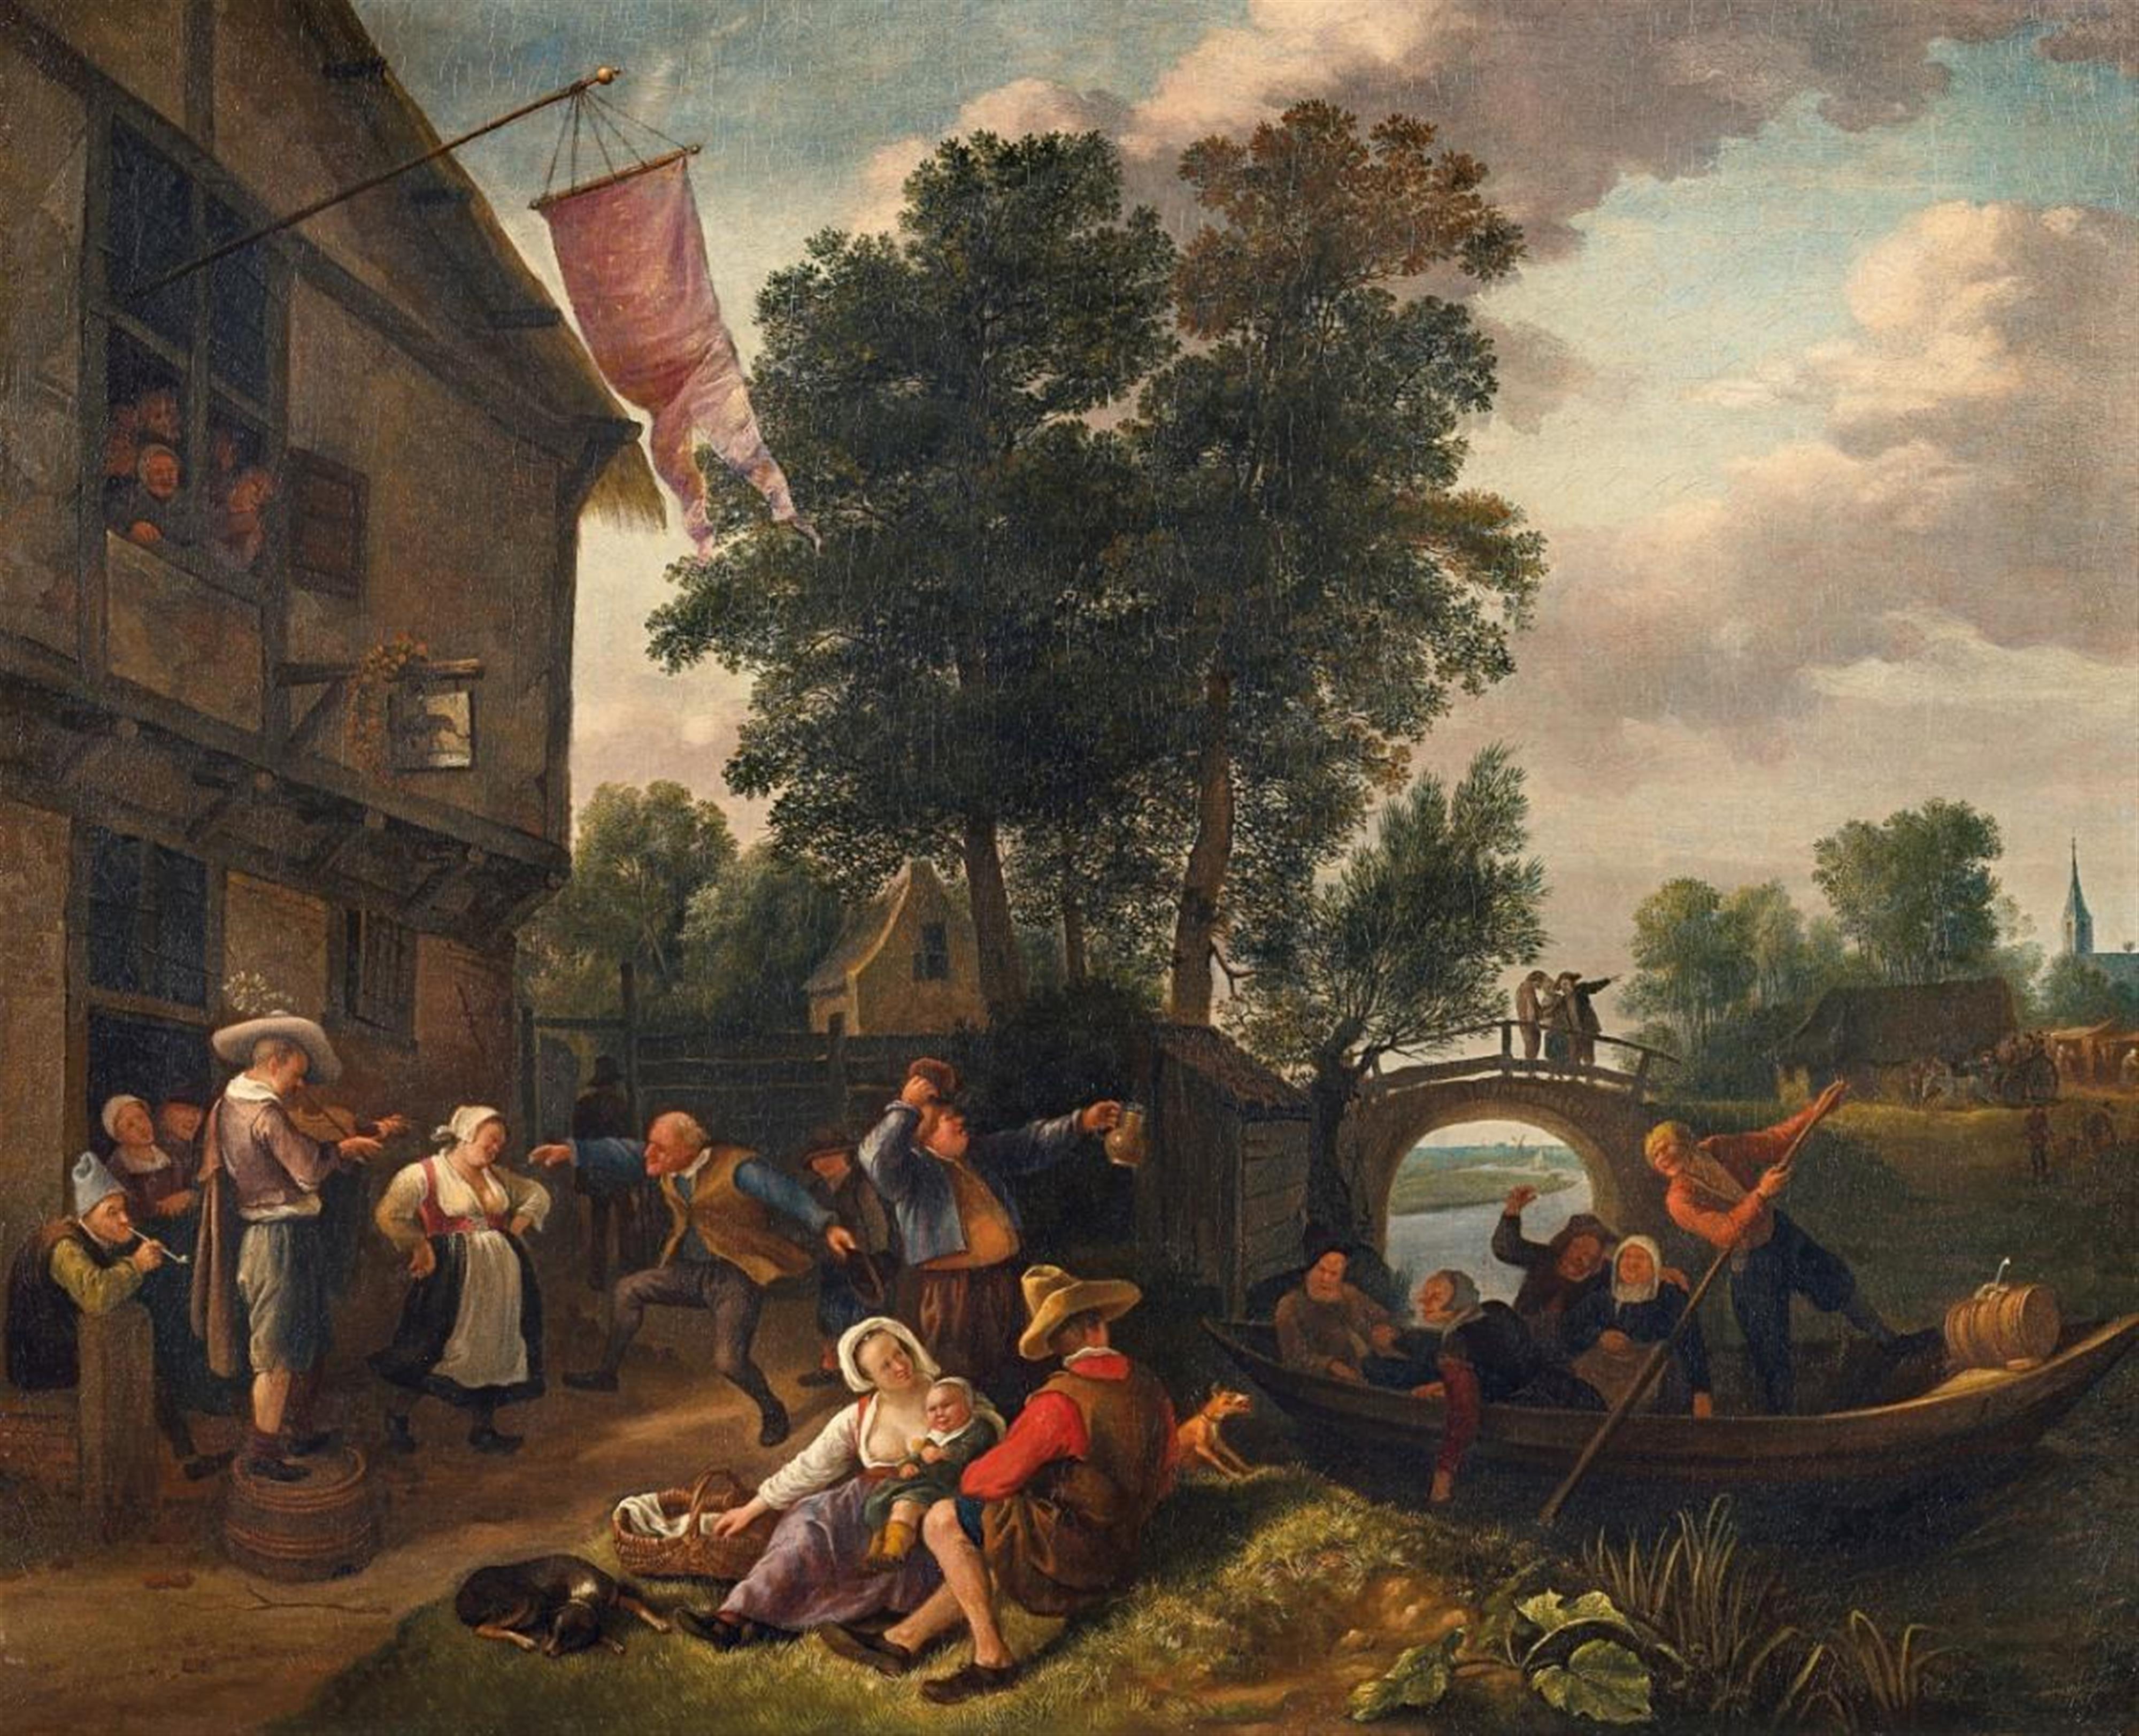 Jan Steen - PEASANTS MAKING MERRY IN FRONT OF A TAVERN - image-1